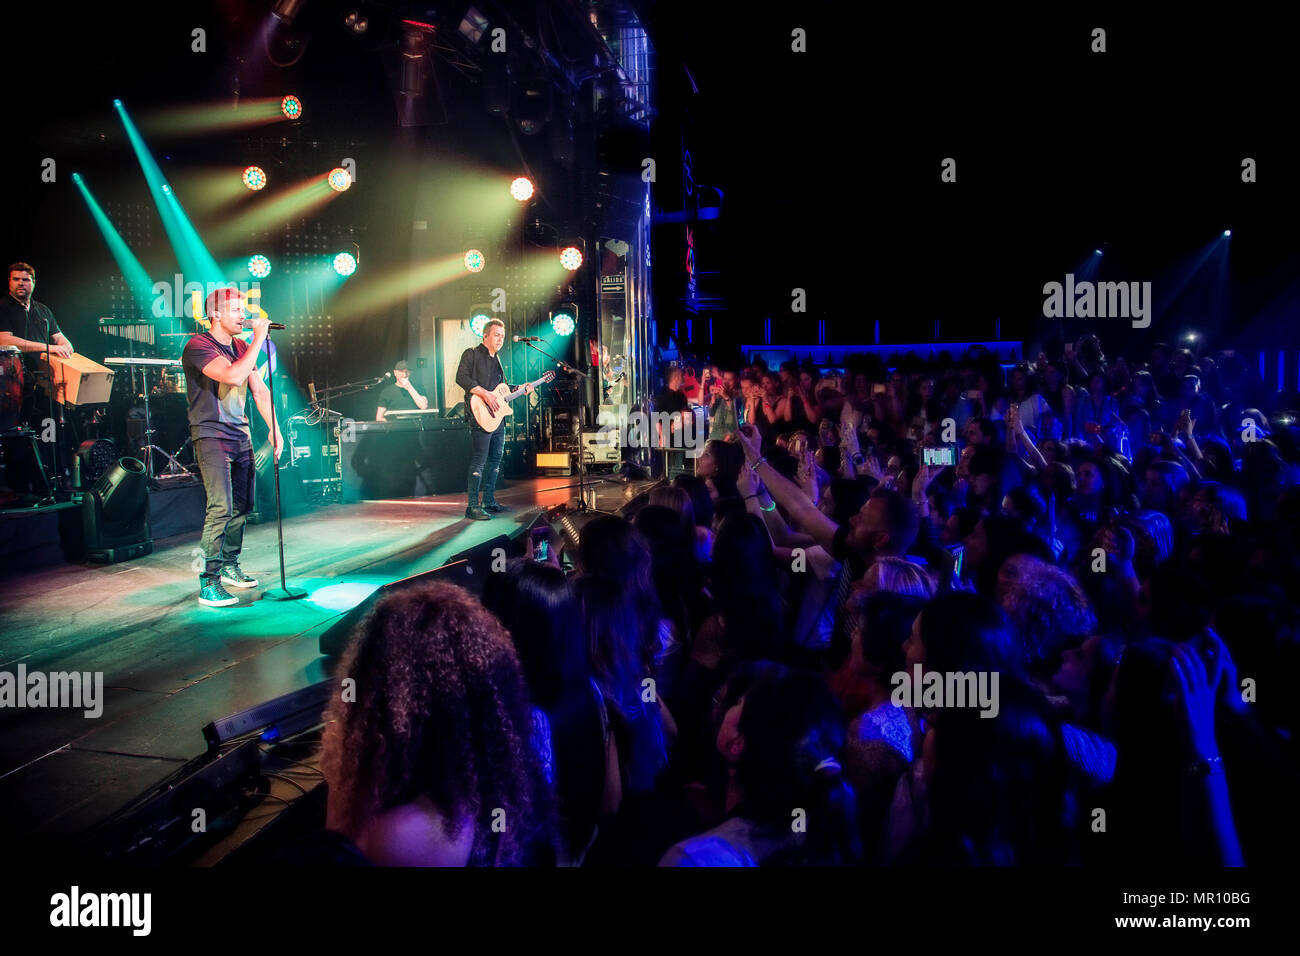 Chronicle of a concert: Long live love, long live Madrid and long live Pablo  Alborán!